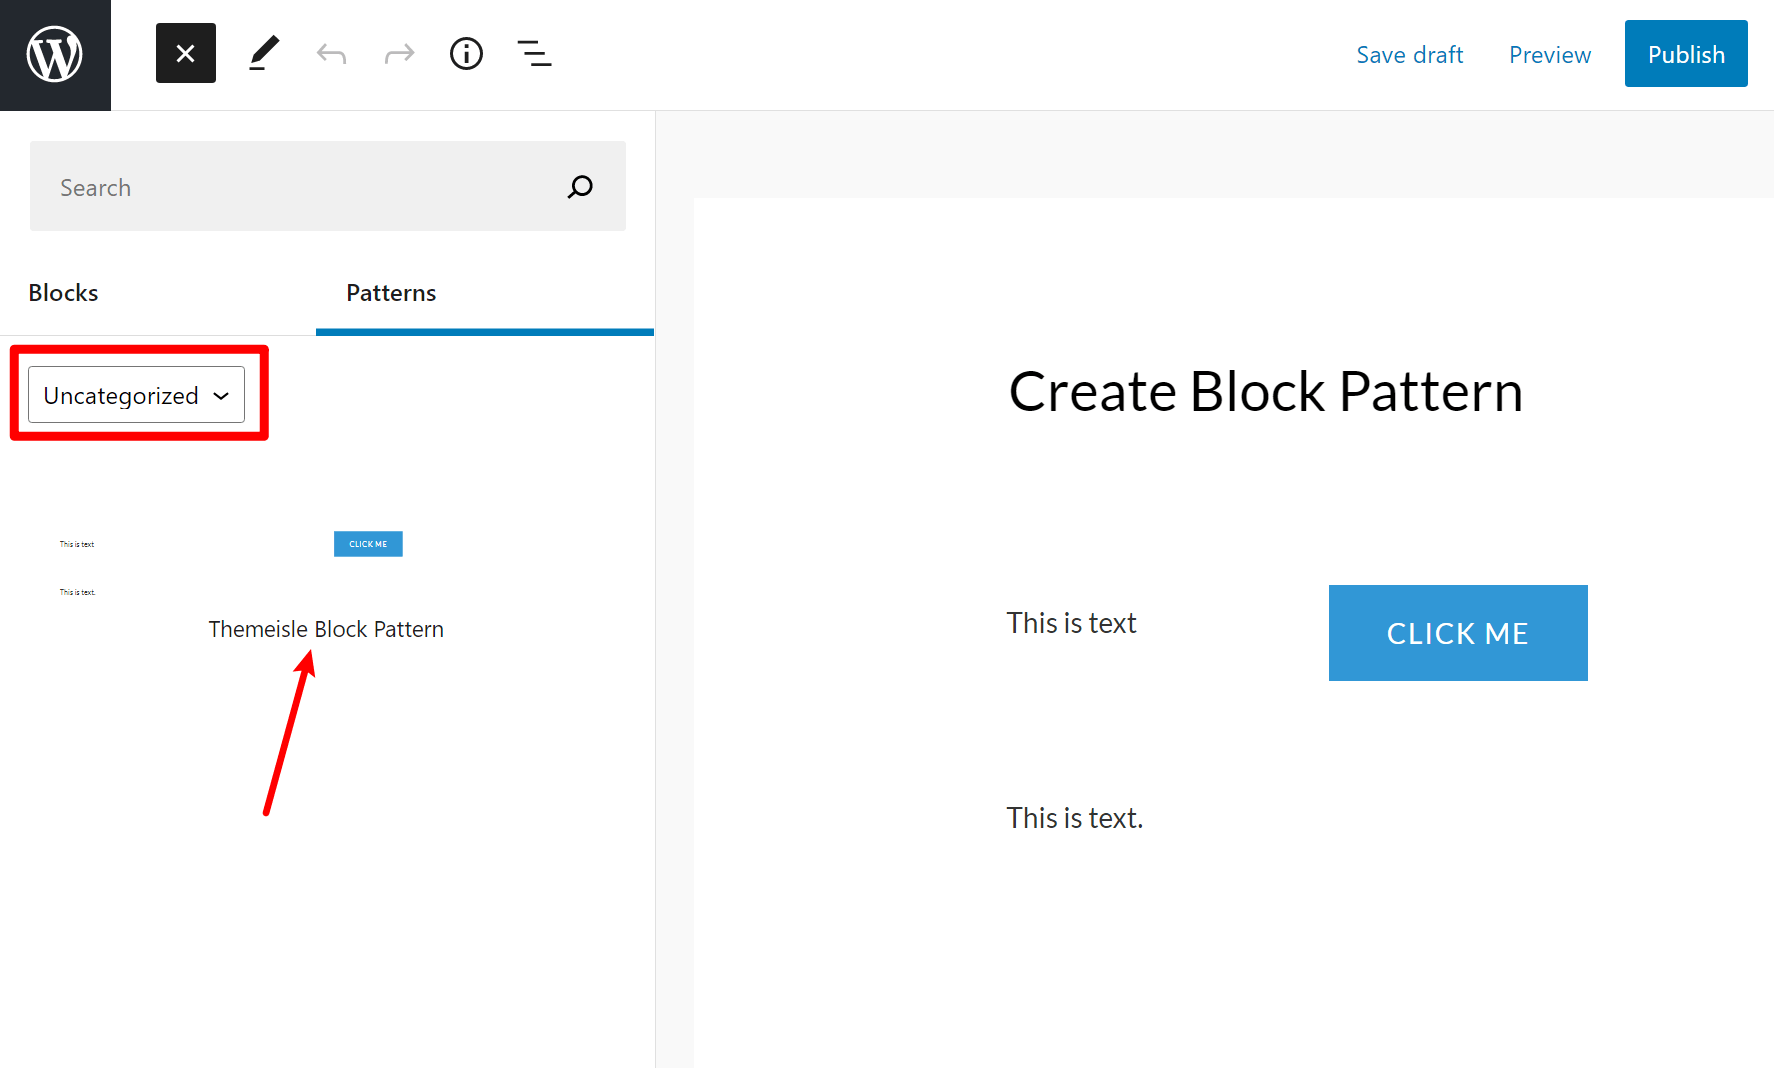 Insert your own block pattern